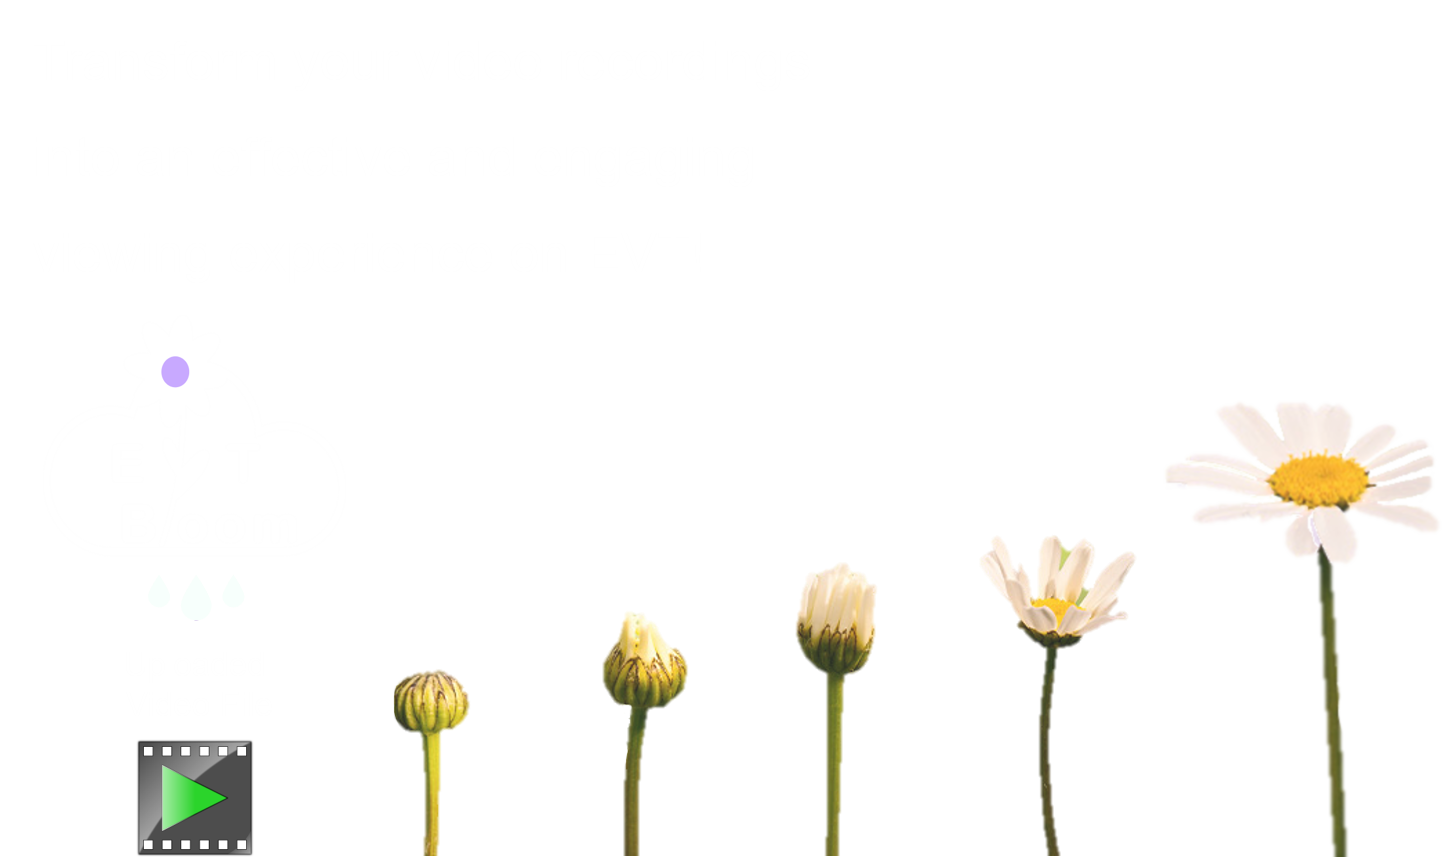 video blooming into an evt curated lecture